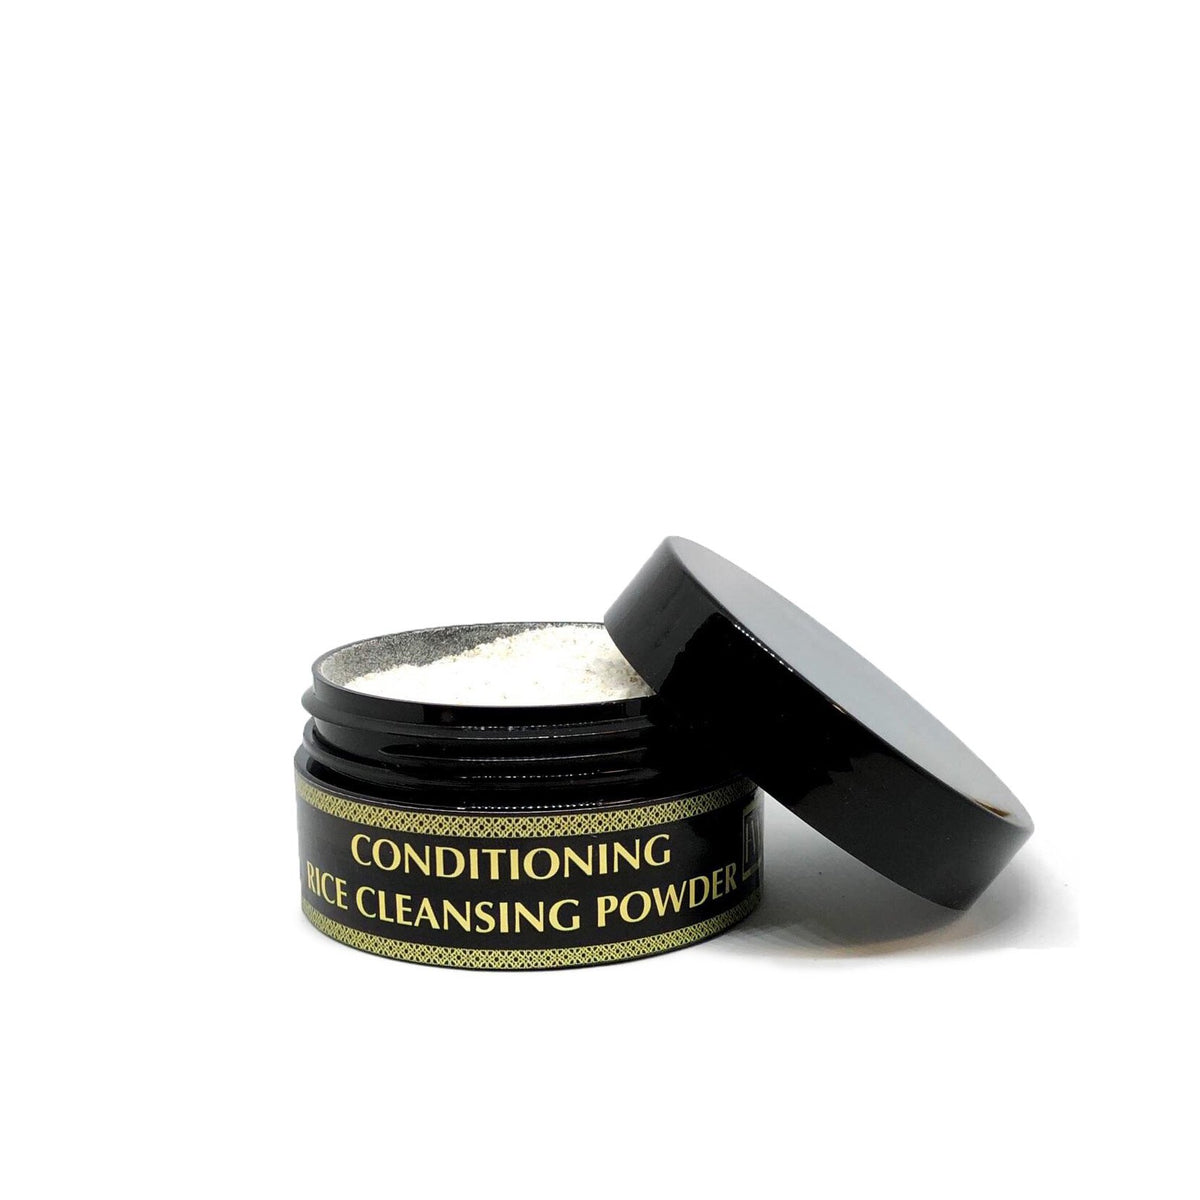 Conditioning Rice Cleansing Powder